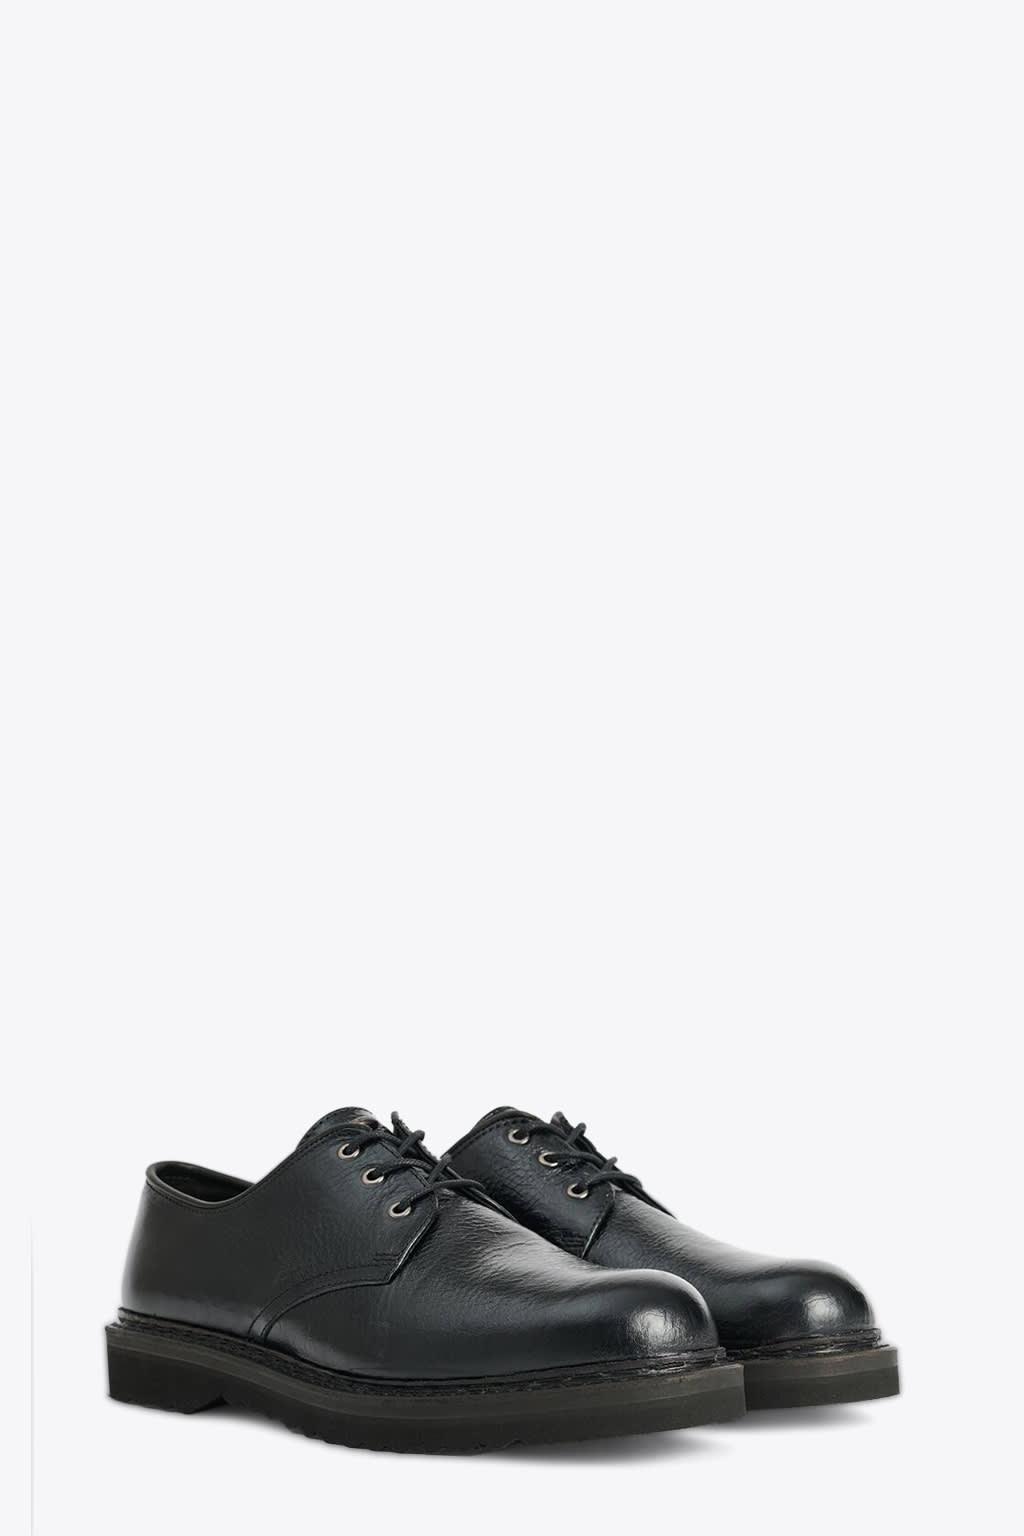 Our Legacy Trampler Shoe Black Cracked Patent Leather Derby Shoes